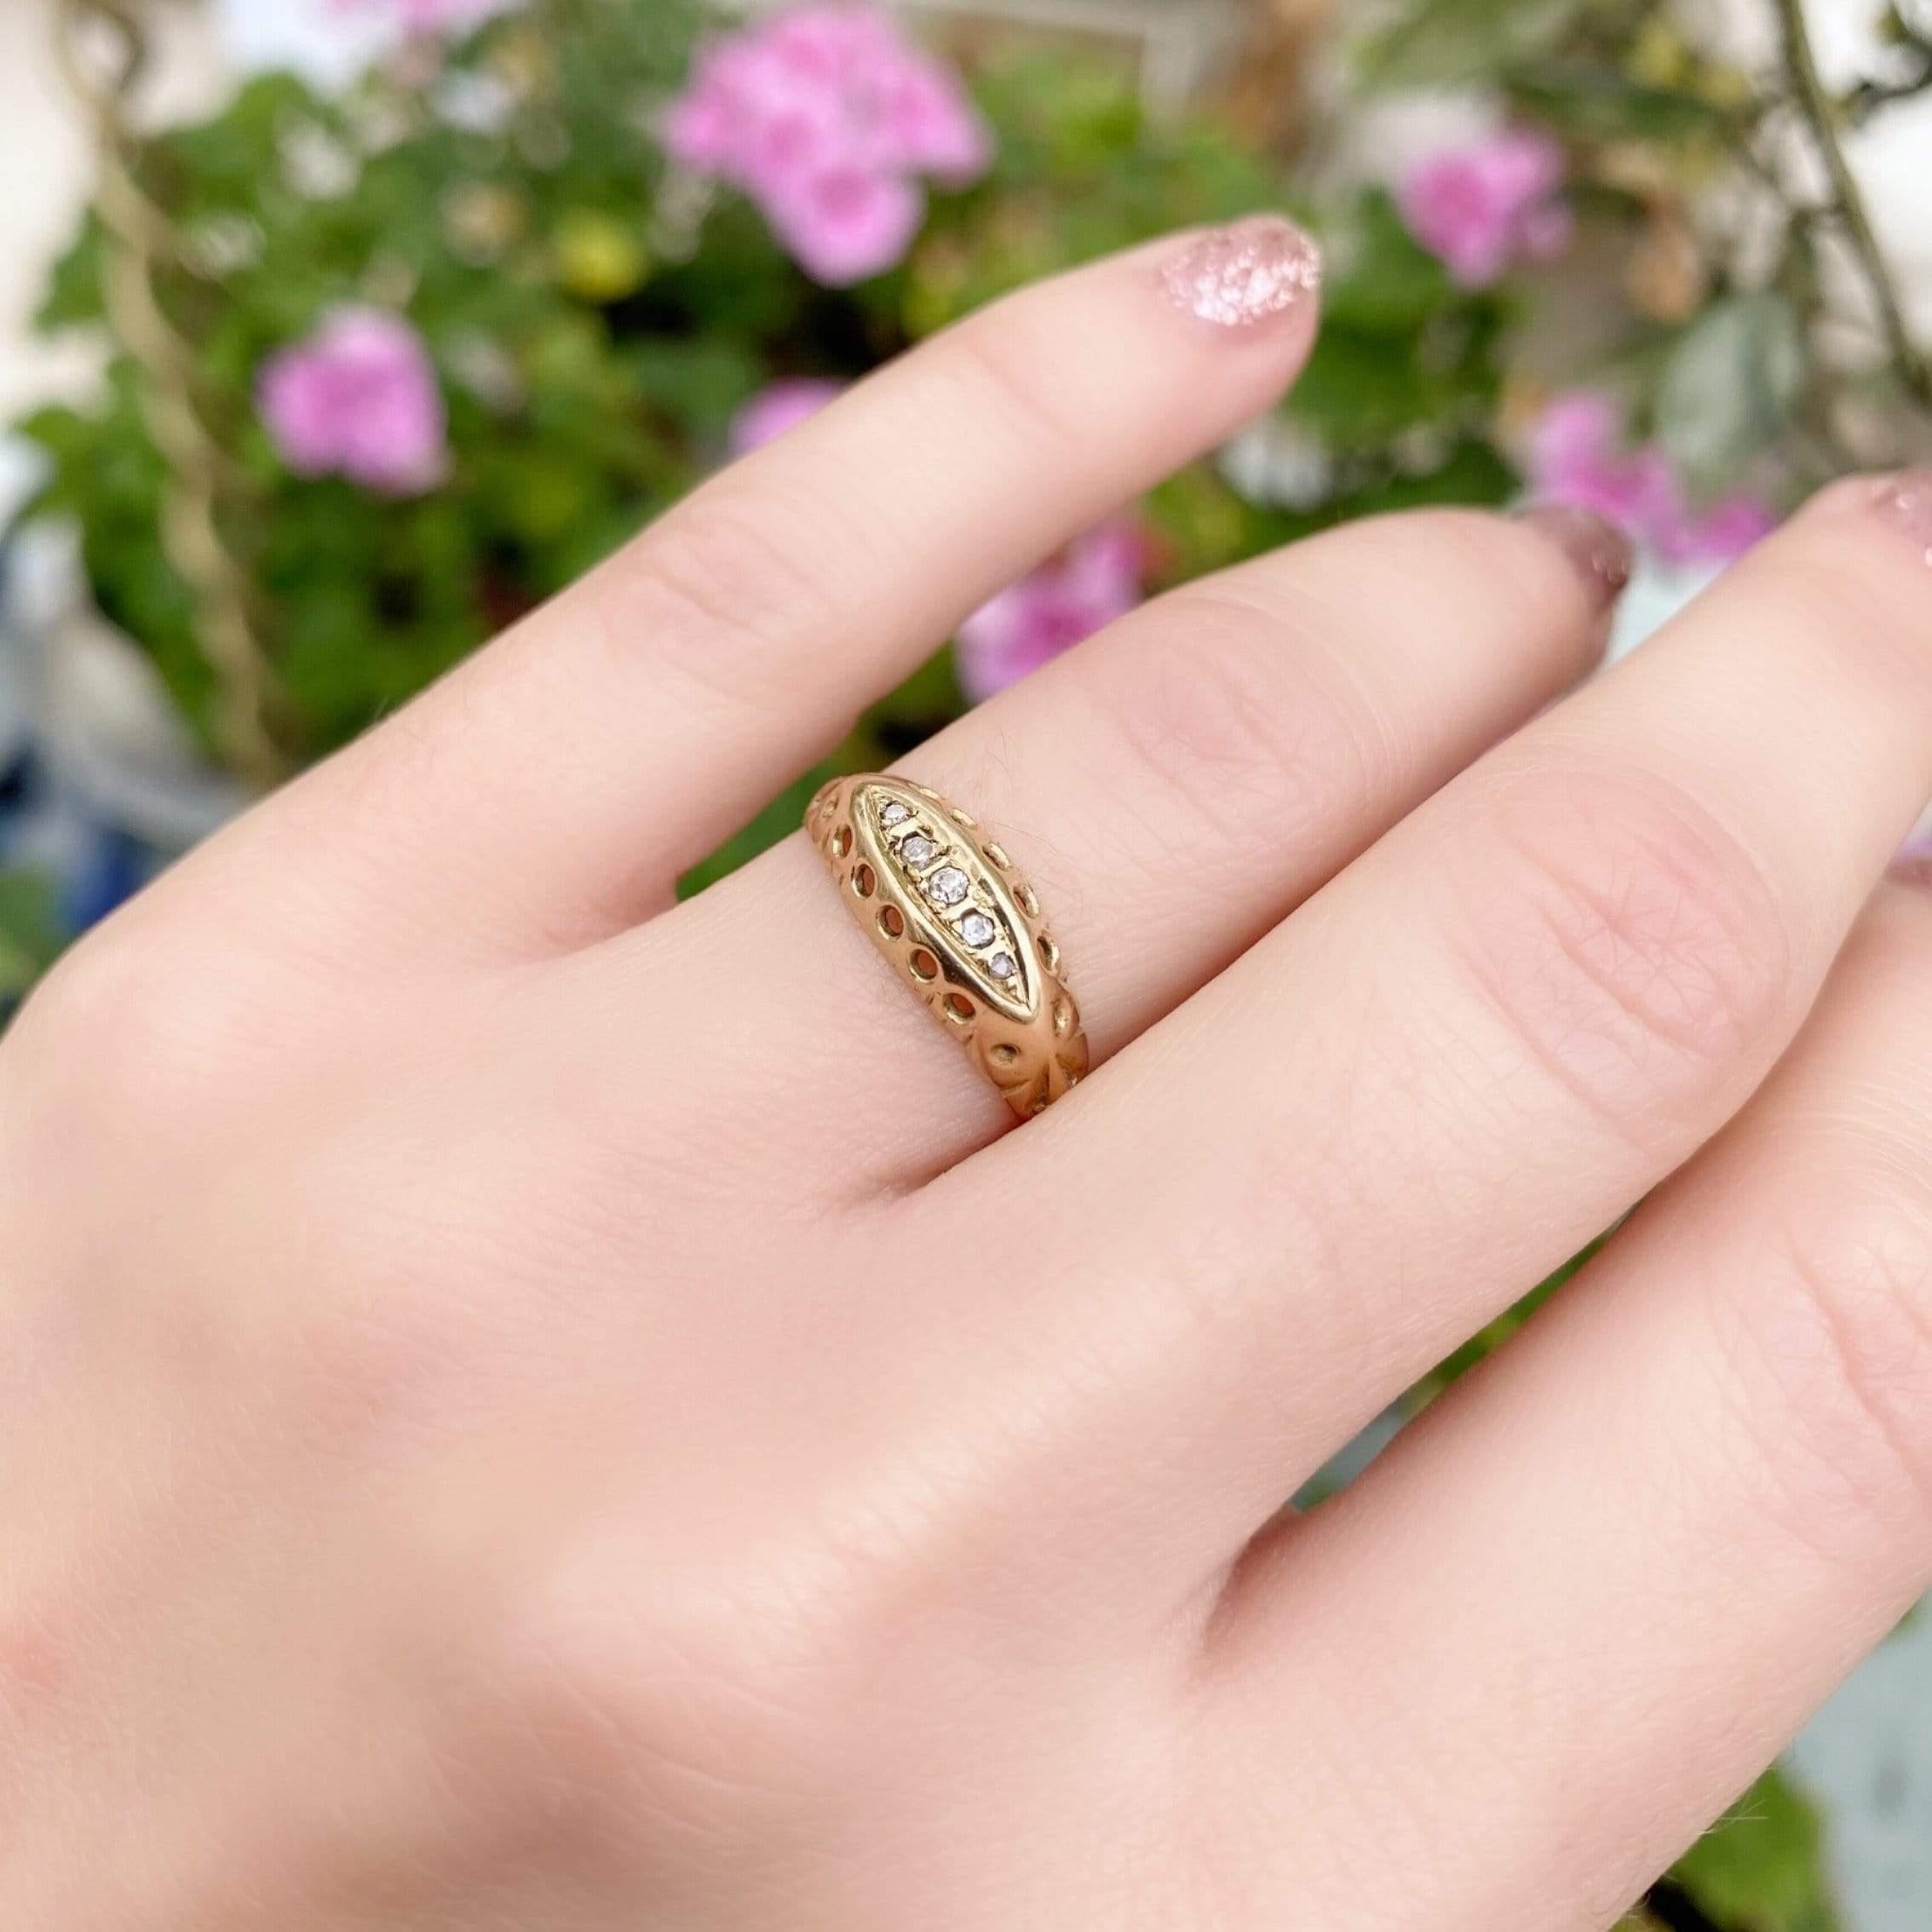 Diamonds symbolise innocence and love, they are the birthstone of April. This classic 18ct gold ring features five antique diamonds set into an ornate setting. The ring has a number of hallmarks indicating the piece was hallmarked in Chester,